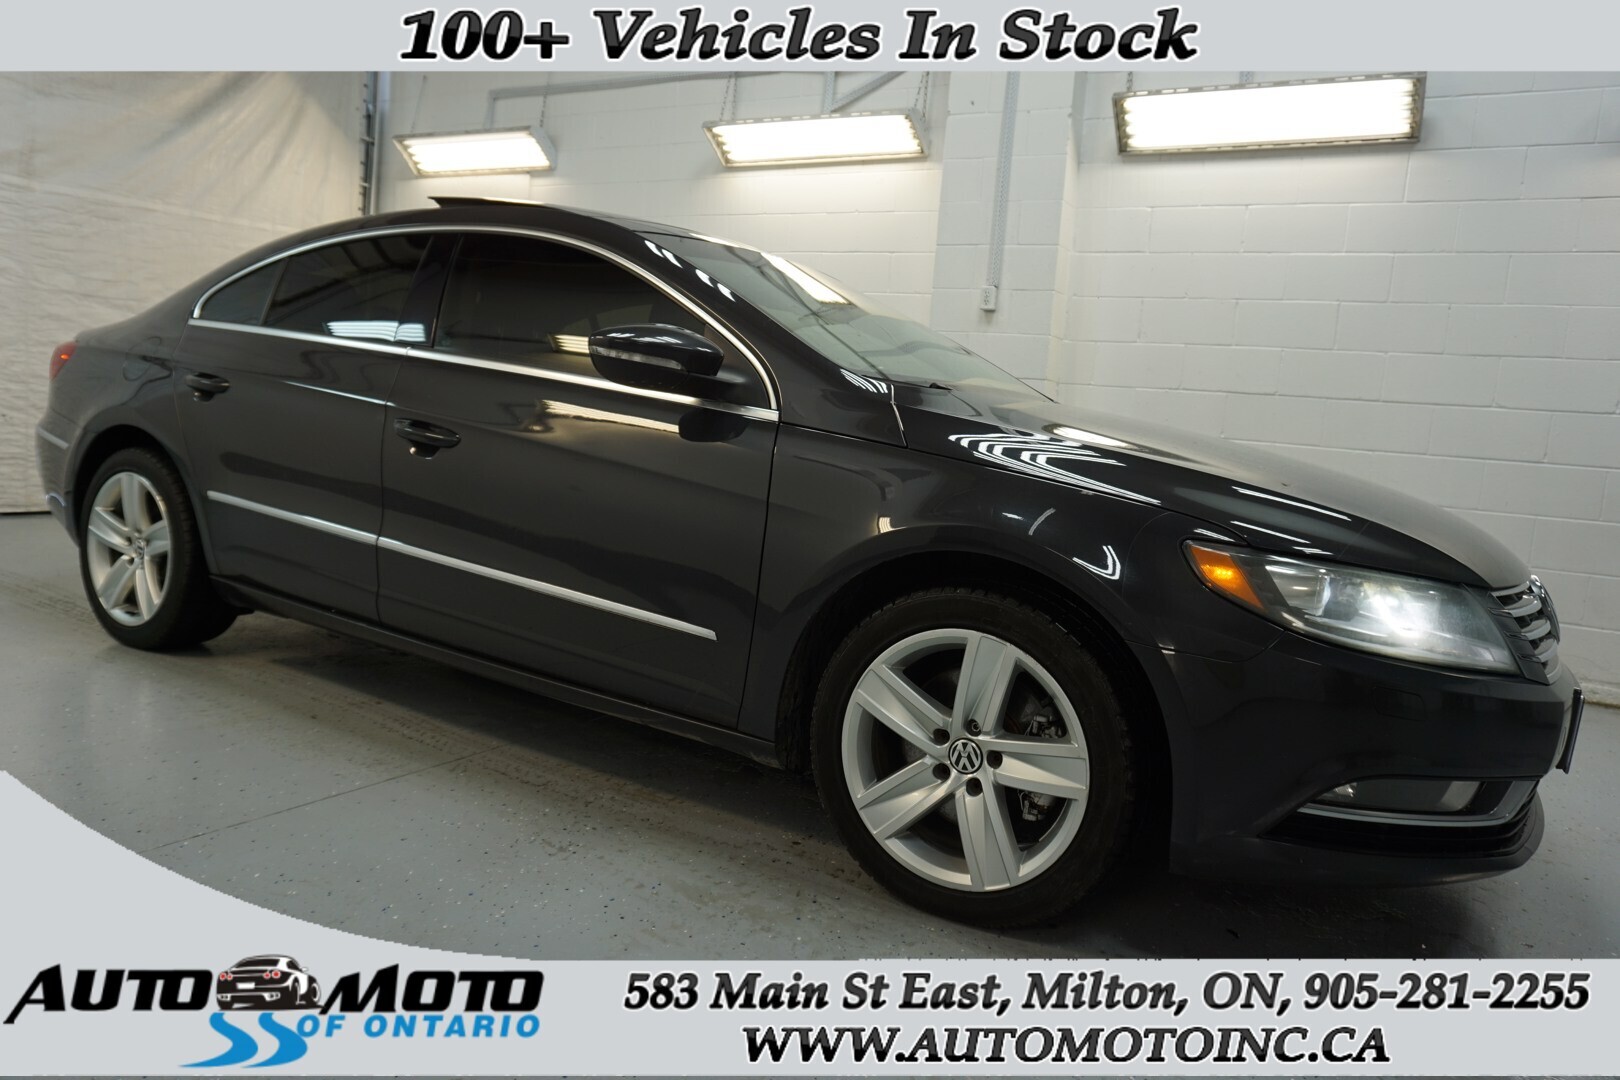 2013 Volkswagen CC SPORTLINE 2.0T CERTIFIED *FREE ACCIDENT* SUNROOF H